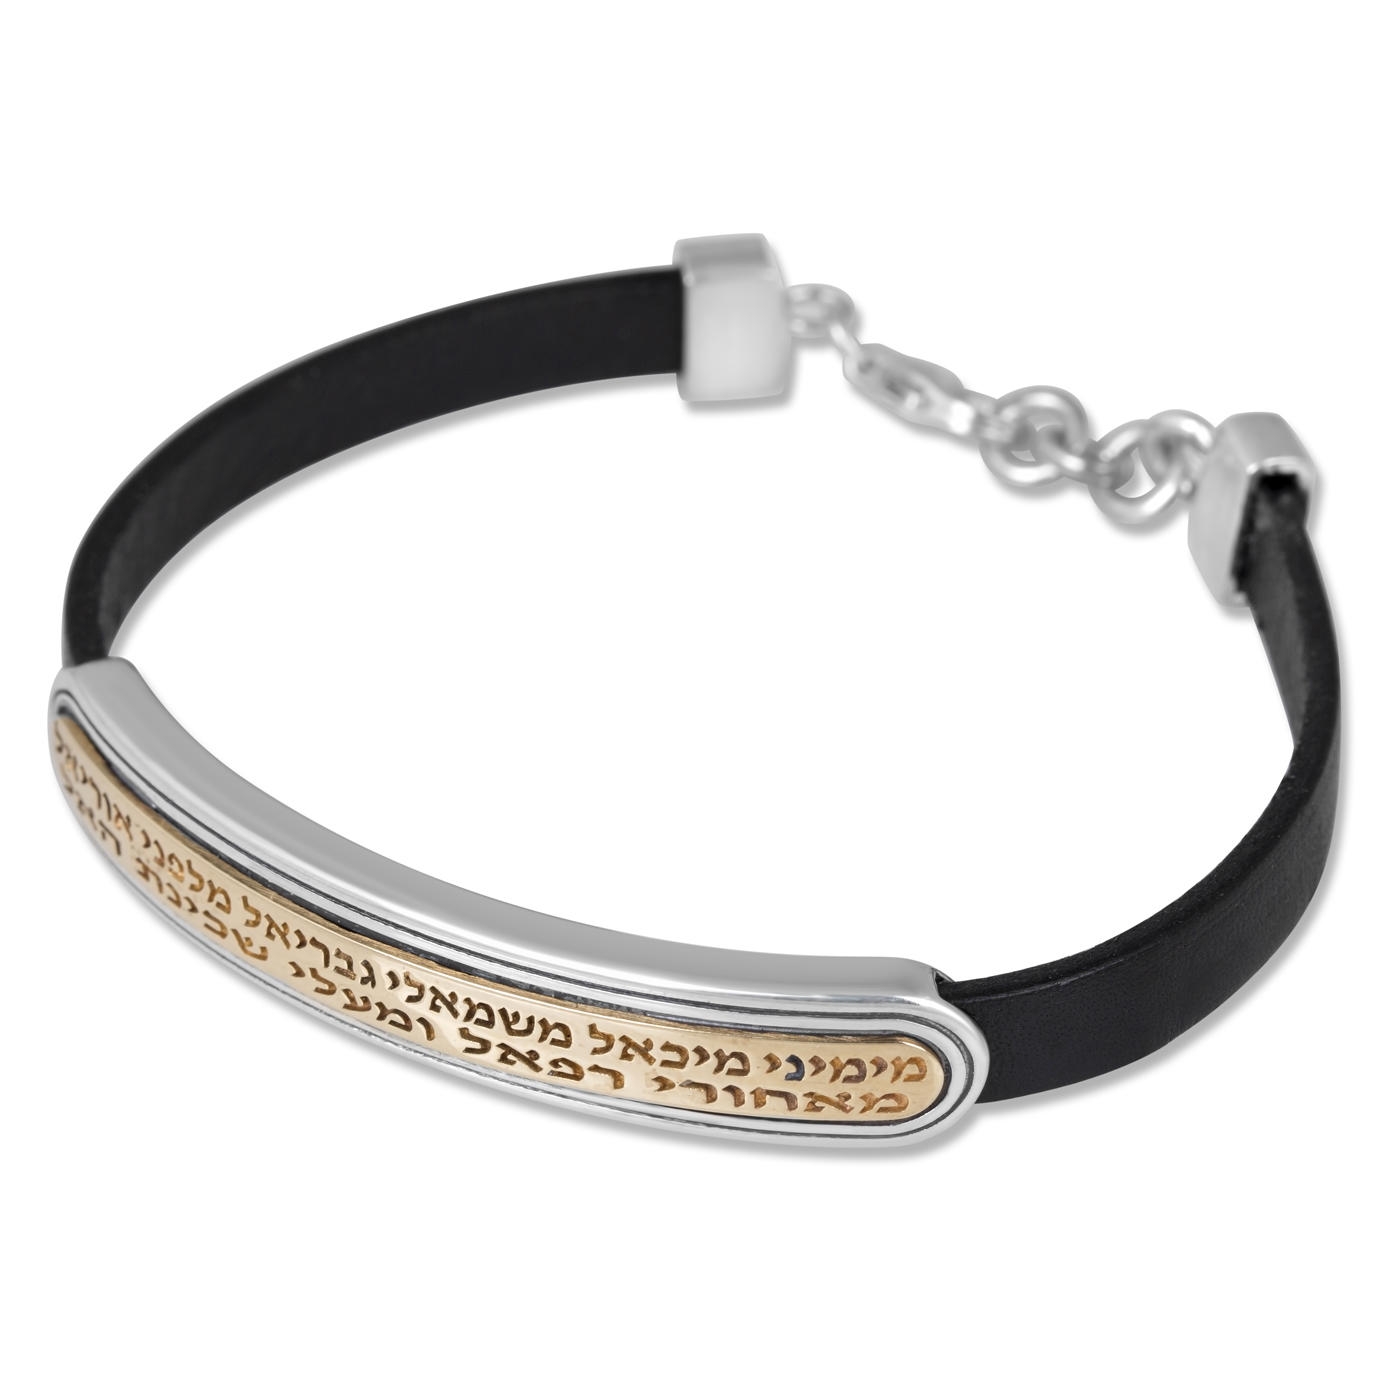 9K Gold, Sterling Silver and Leather Bracelet with Angels Inscription - 1